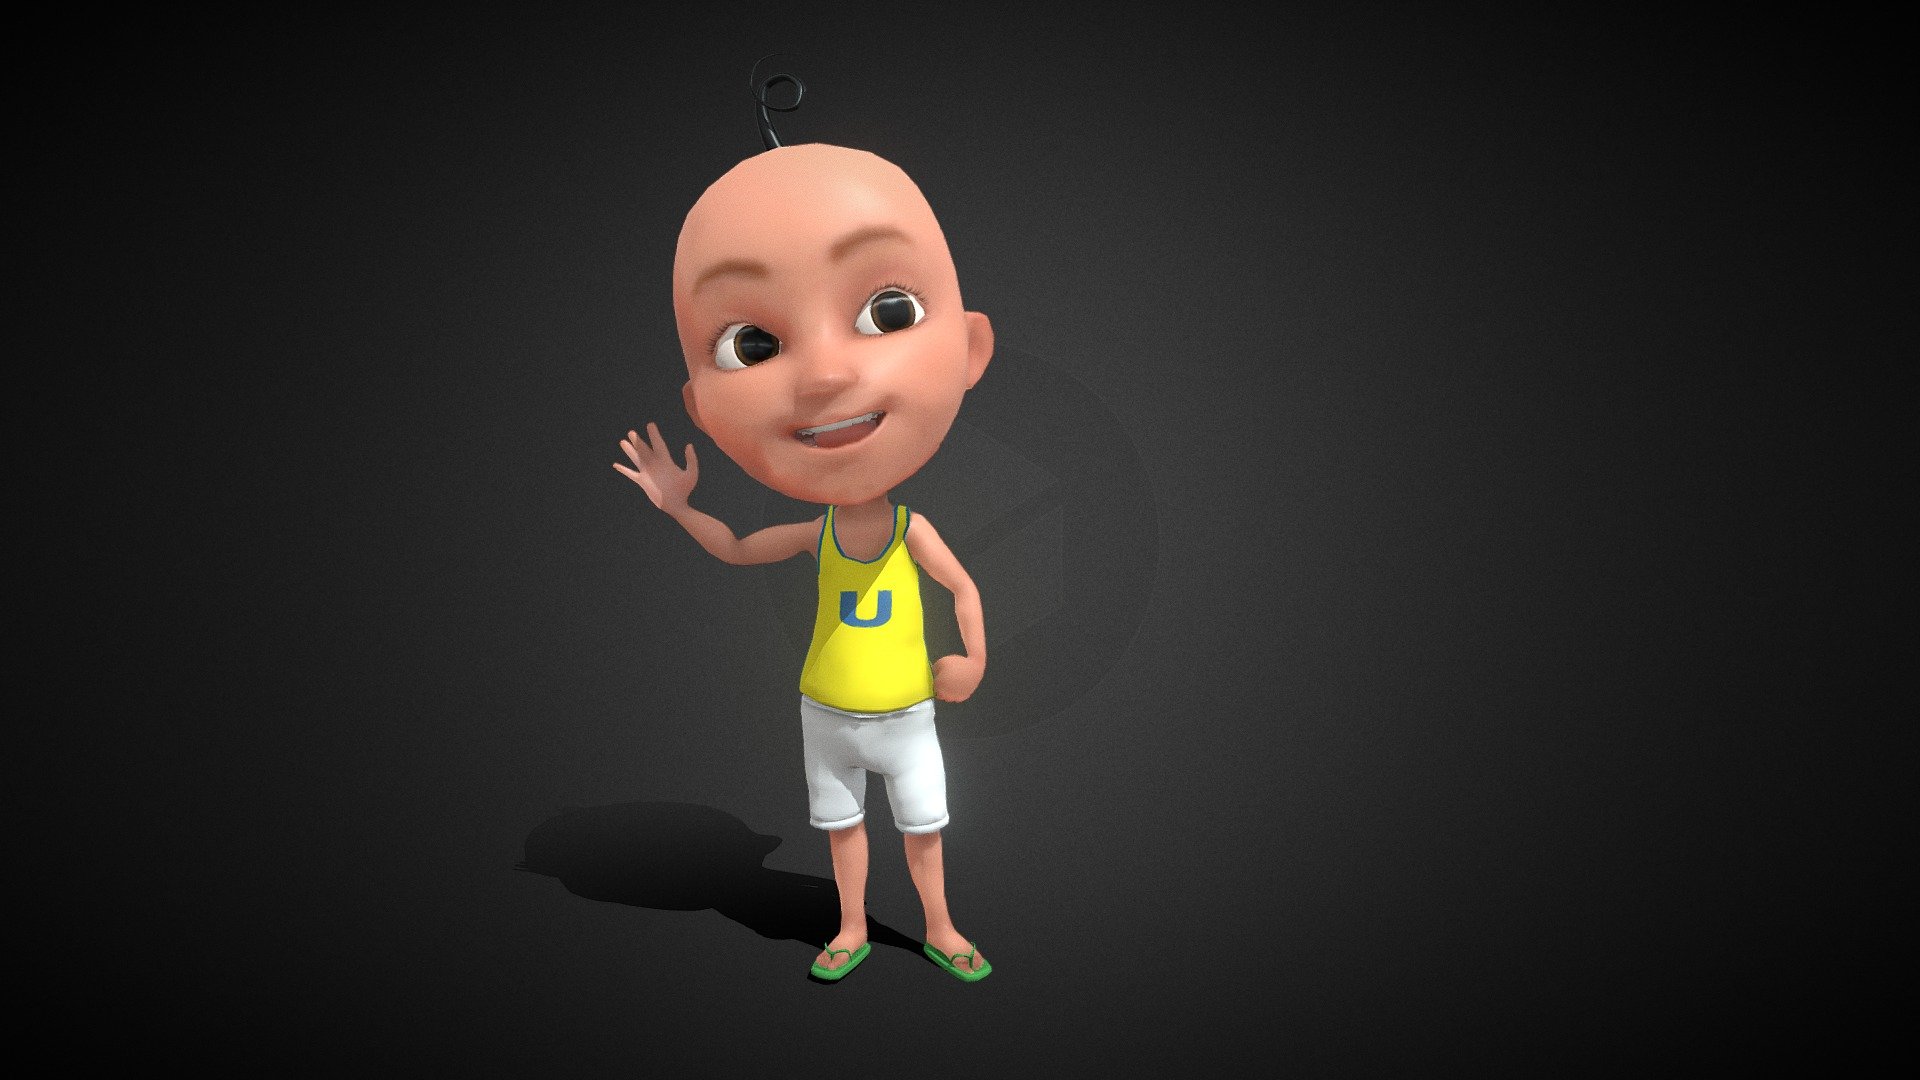 Funny boy character
Optimized for games and animations - Baby Boy - 3D model by hosein hajipour (@hoseinhajipour) 3d model